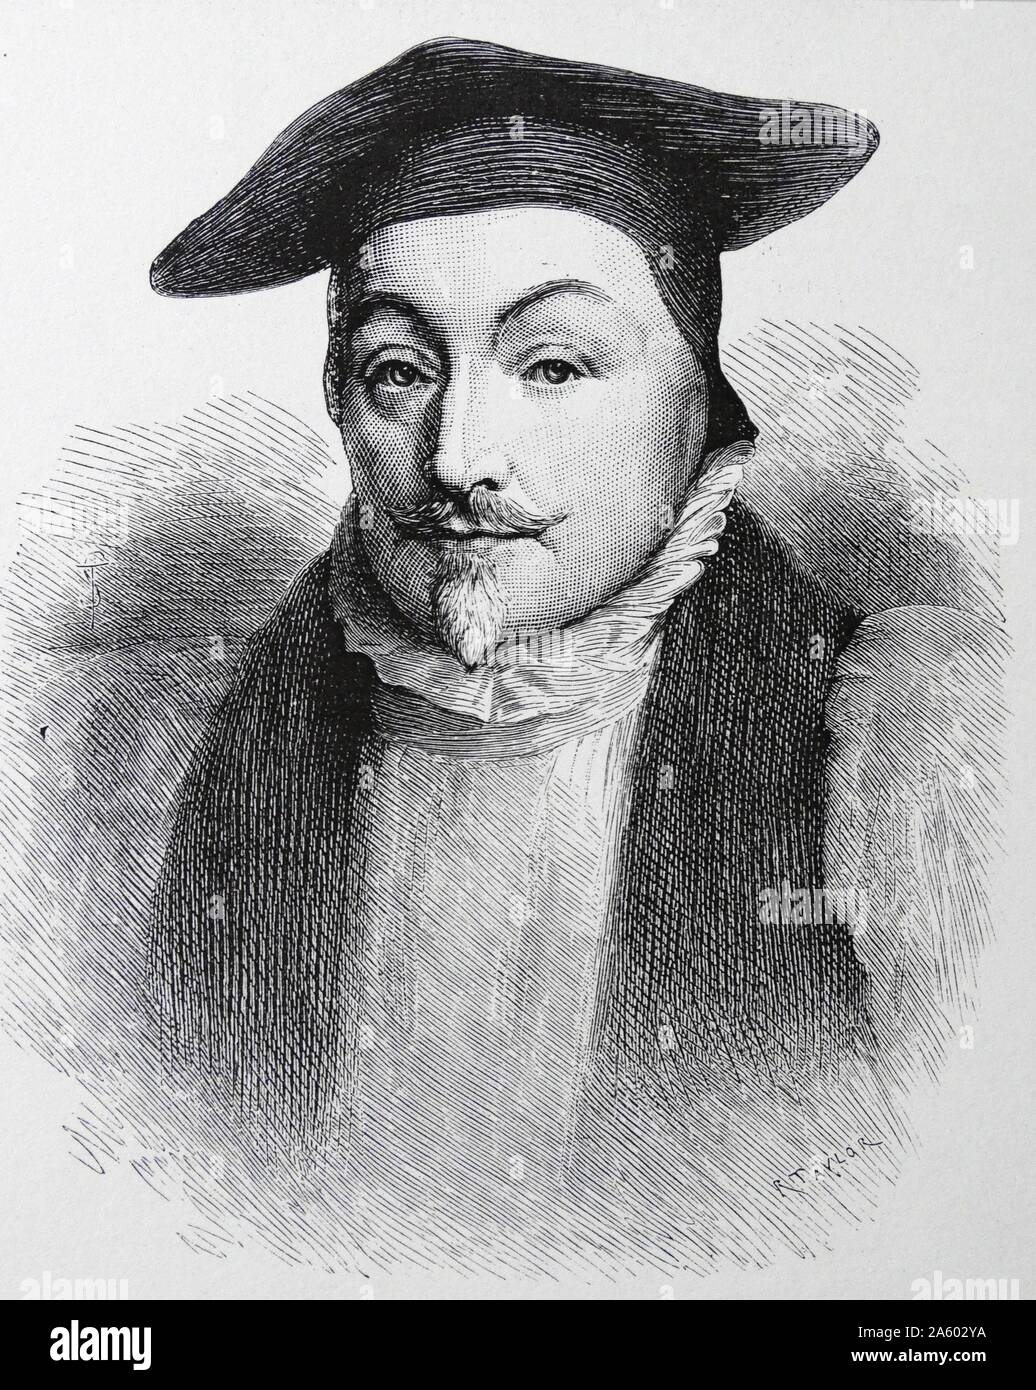 William LAUD (1573-1645). English prelate. Archbishop of Canterbury 1633 . In effect, first minister to Charles I and, with Strafford and king, formed triumvirate to establish absolutism in church and state. Beheaded under rule of Parliament Stock Photo